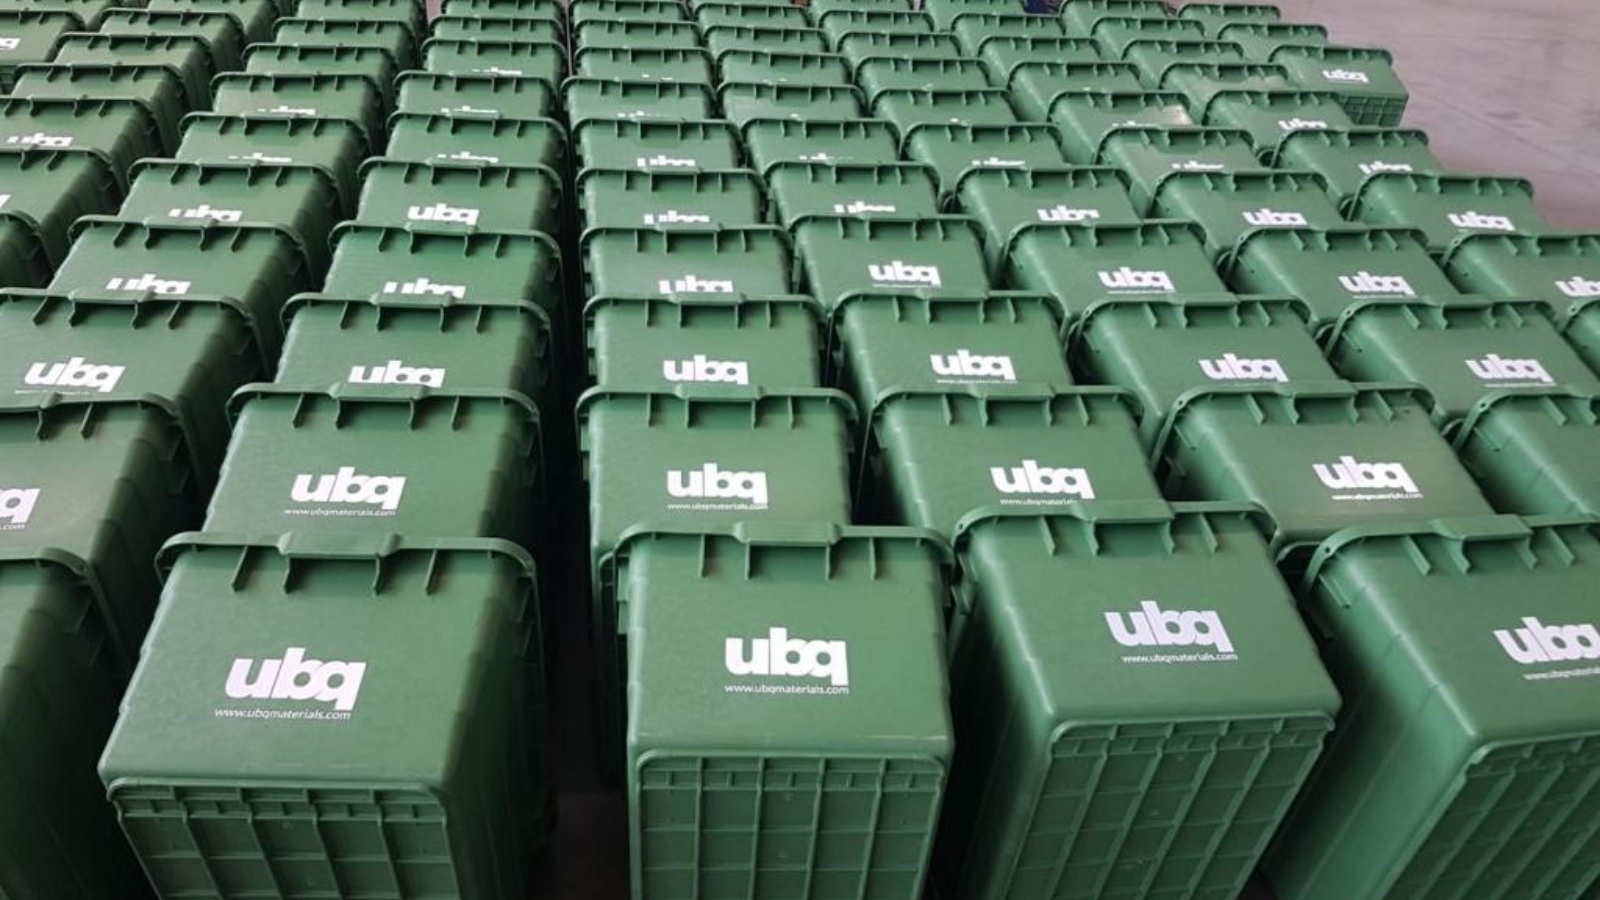 These recycling bins, made in Israel from UBQ material, are being used in Virginia. Photo: courtesy